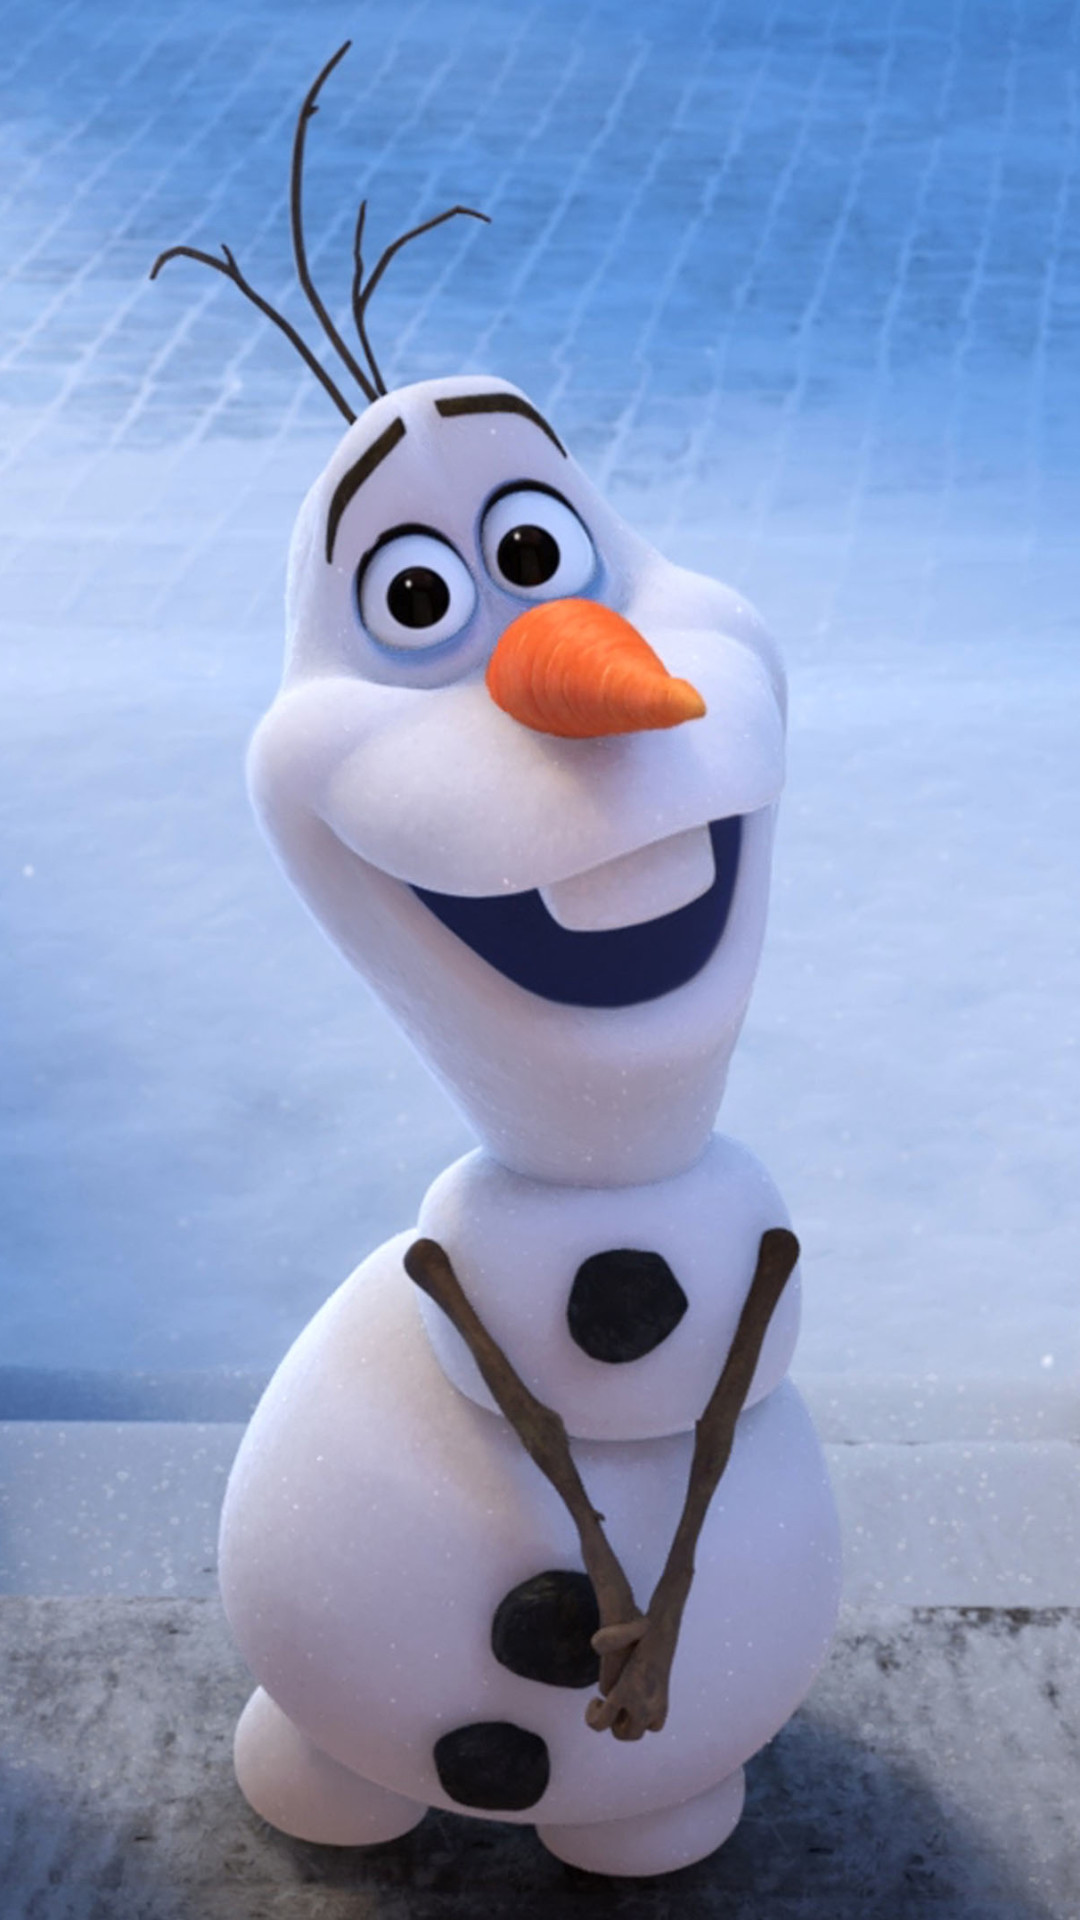 Olaf From Frozen Wallpaper (70+ images)